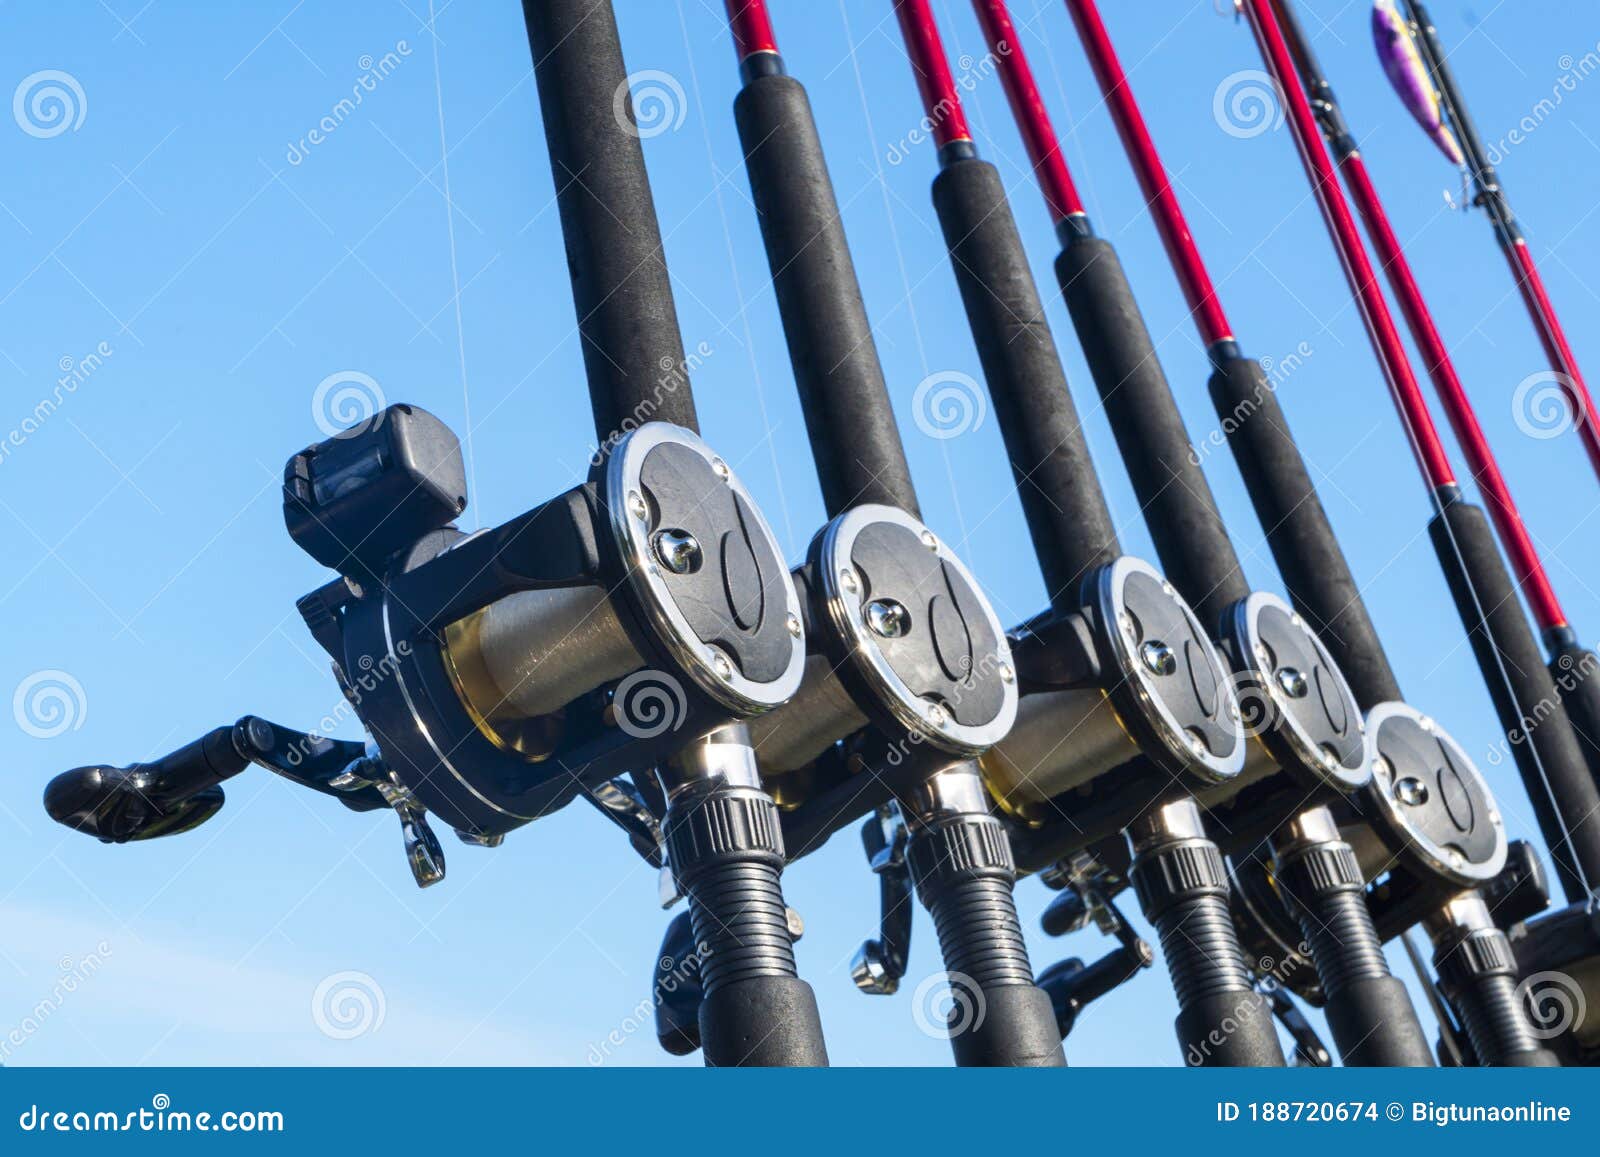 Fishing Trolling Boat Rods in Rod Holder. Big Game Fishing. Fishing Reels  and Rods Pattern on Boat Stock Photo - Image of coast, angler: 188720674